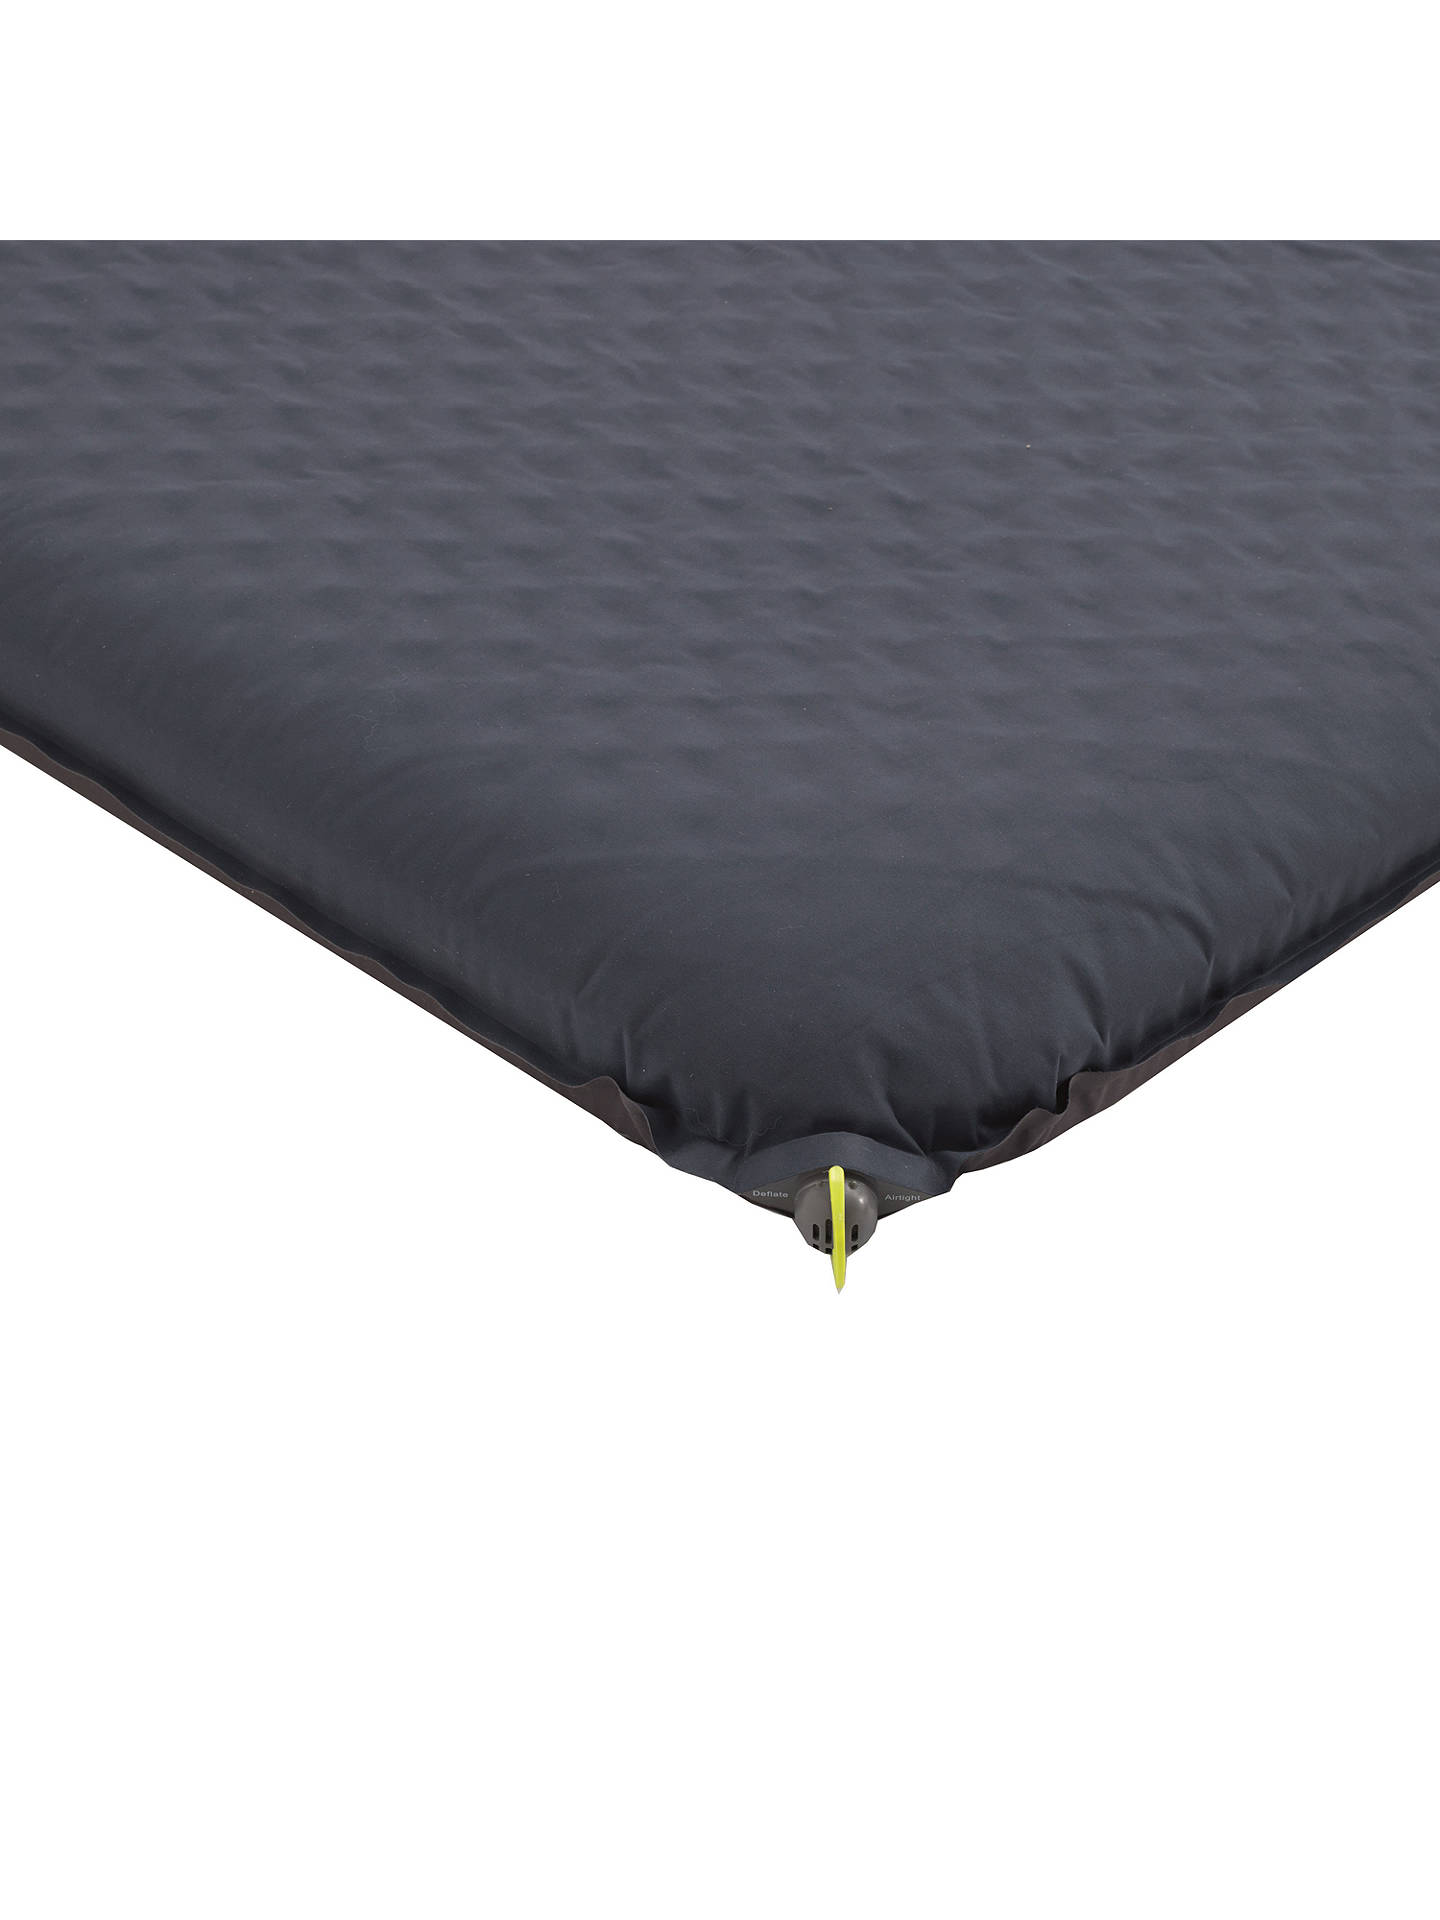 Outwell Self-Inflating Mat 5cm Double Sleepin for Camping